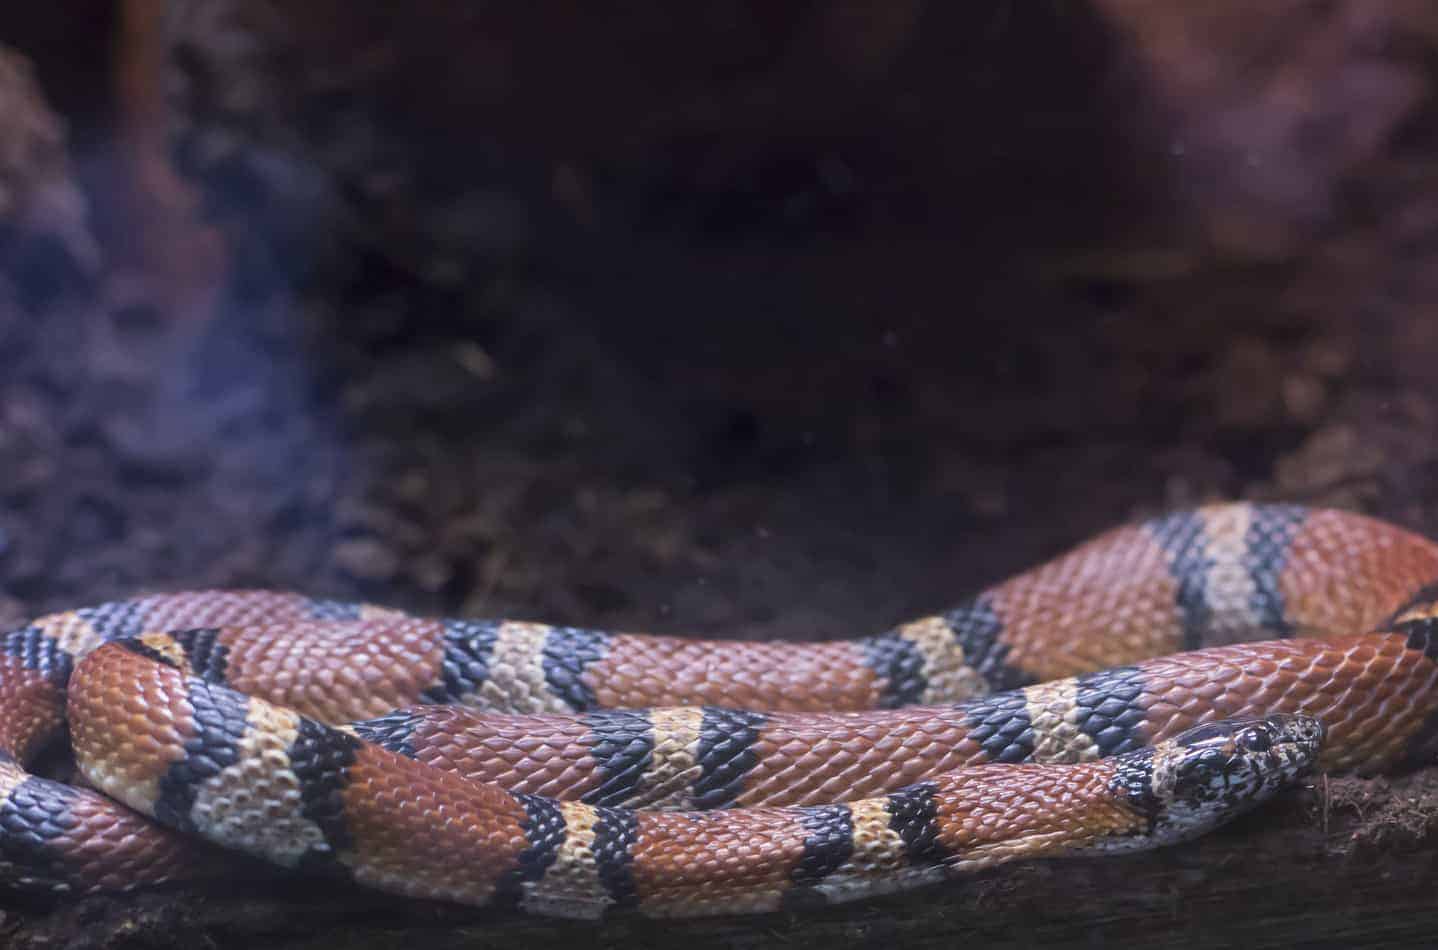 how big do milk snakes get How Big Do Milk Snakes Get and What's Their Growth Rate?